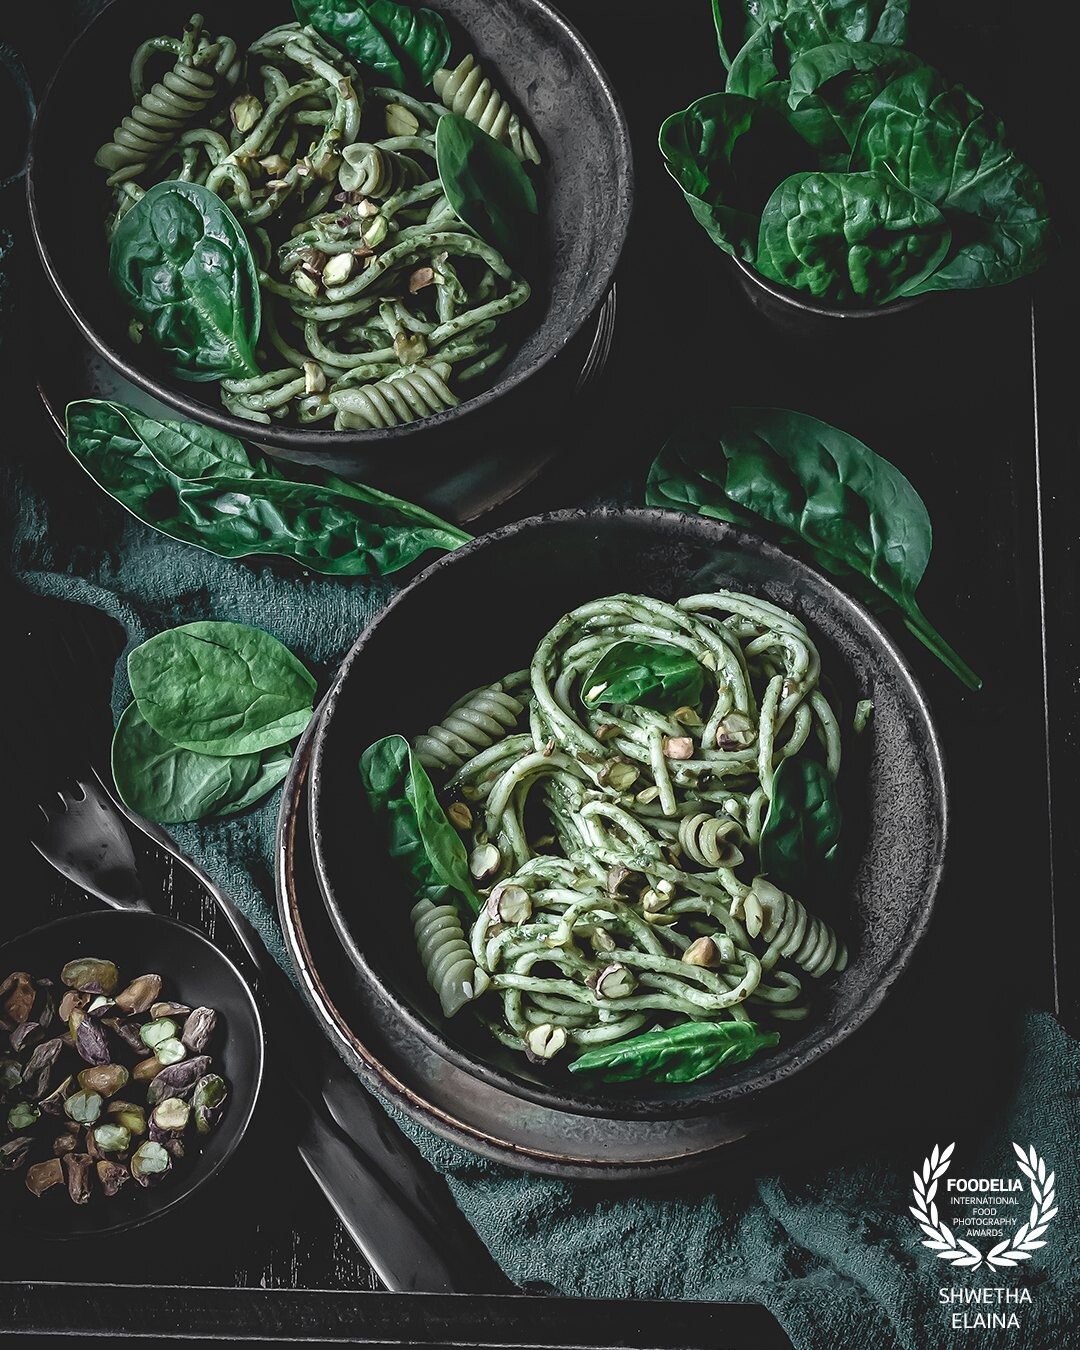 The focus was on color theory, and I chose monochrome. This was an attempt to capture green in all of its glory, with this GF pasta tossed in spinach and roasted pistachio pesto.